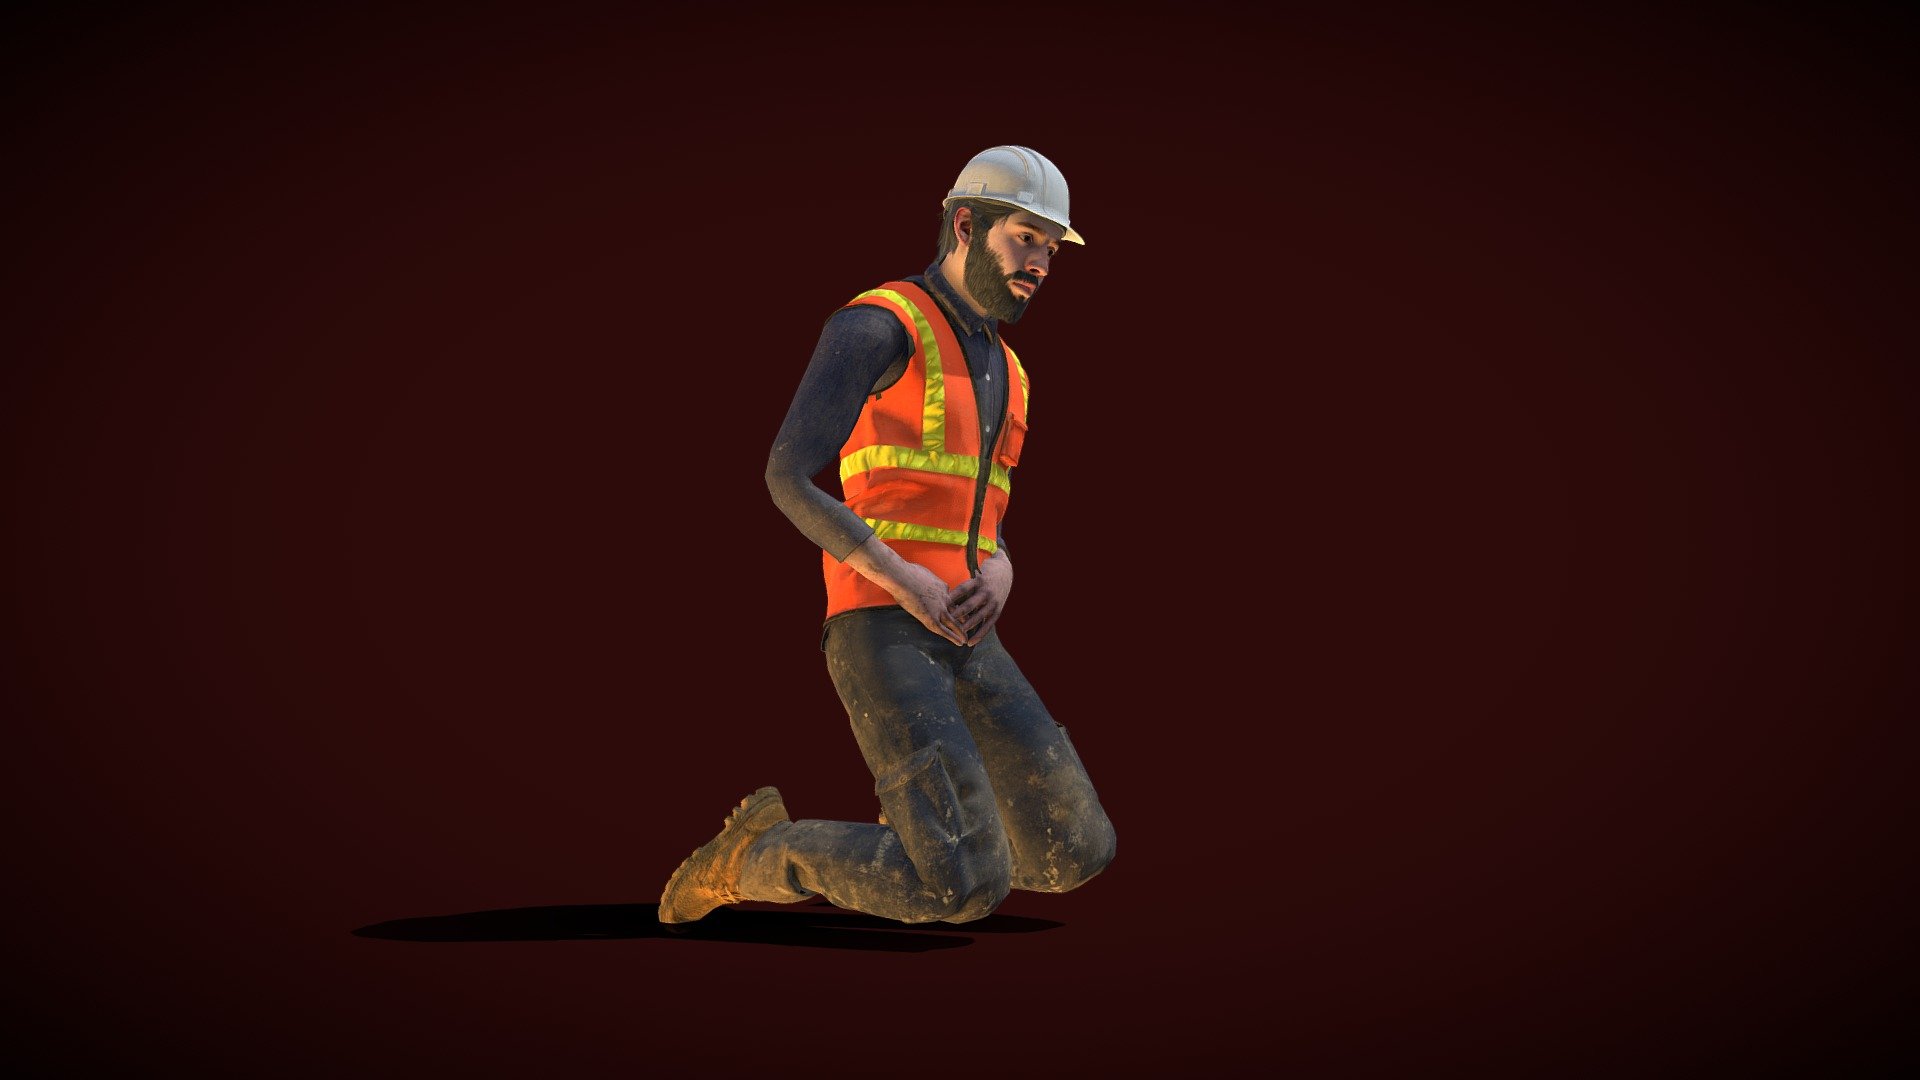 An Animation of a Construction Worker character kicked in the groin and falling to the ground.

See this 3D model in action, and more models like it, in this collection of free augmented reality apps:

https://morpheusar.com/ - Animated Kicked Groin Construction Worker - 3D model by LasquetiSpice 3d model